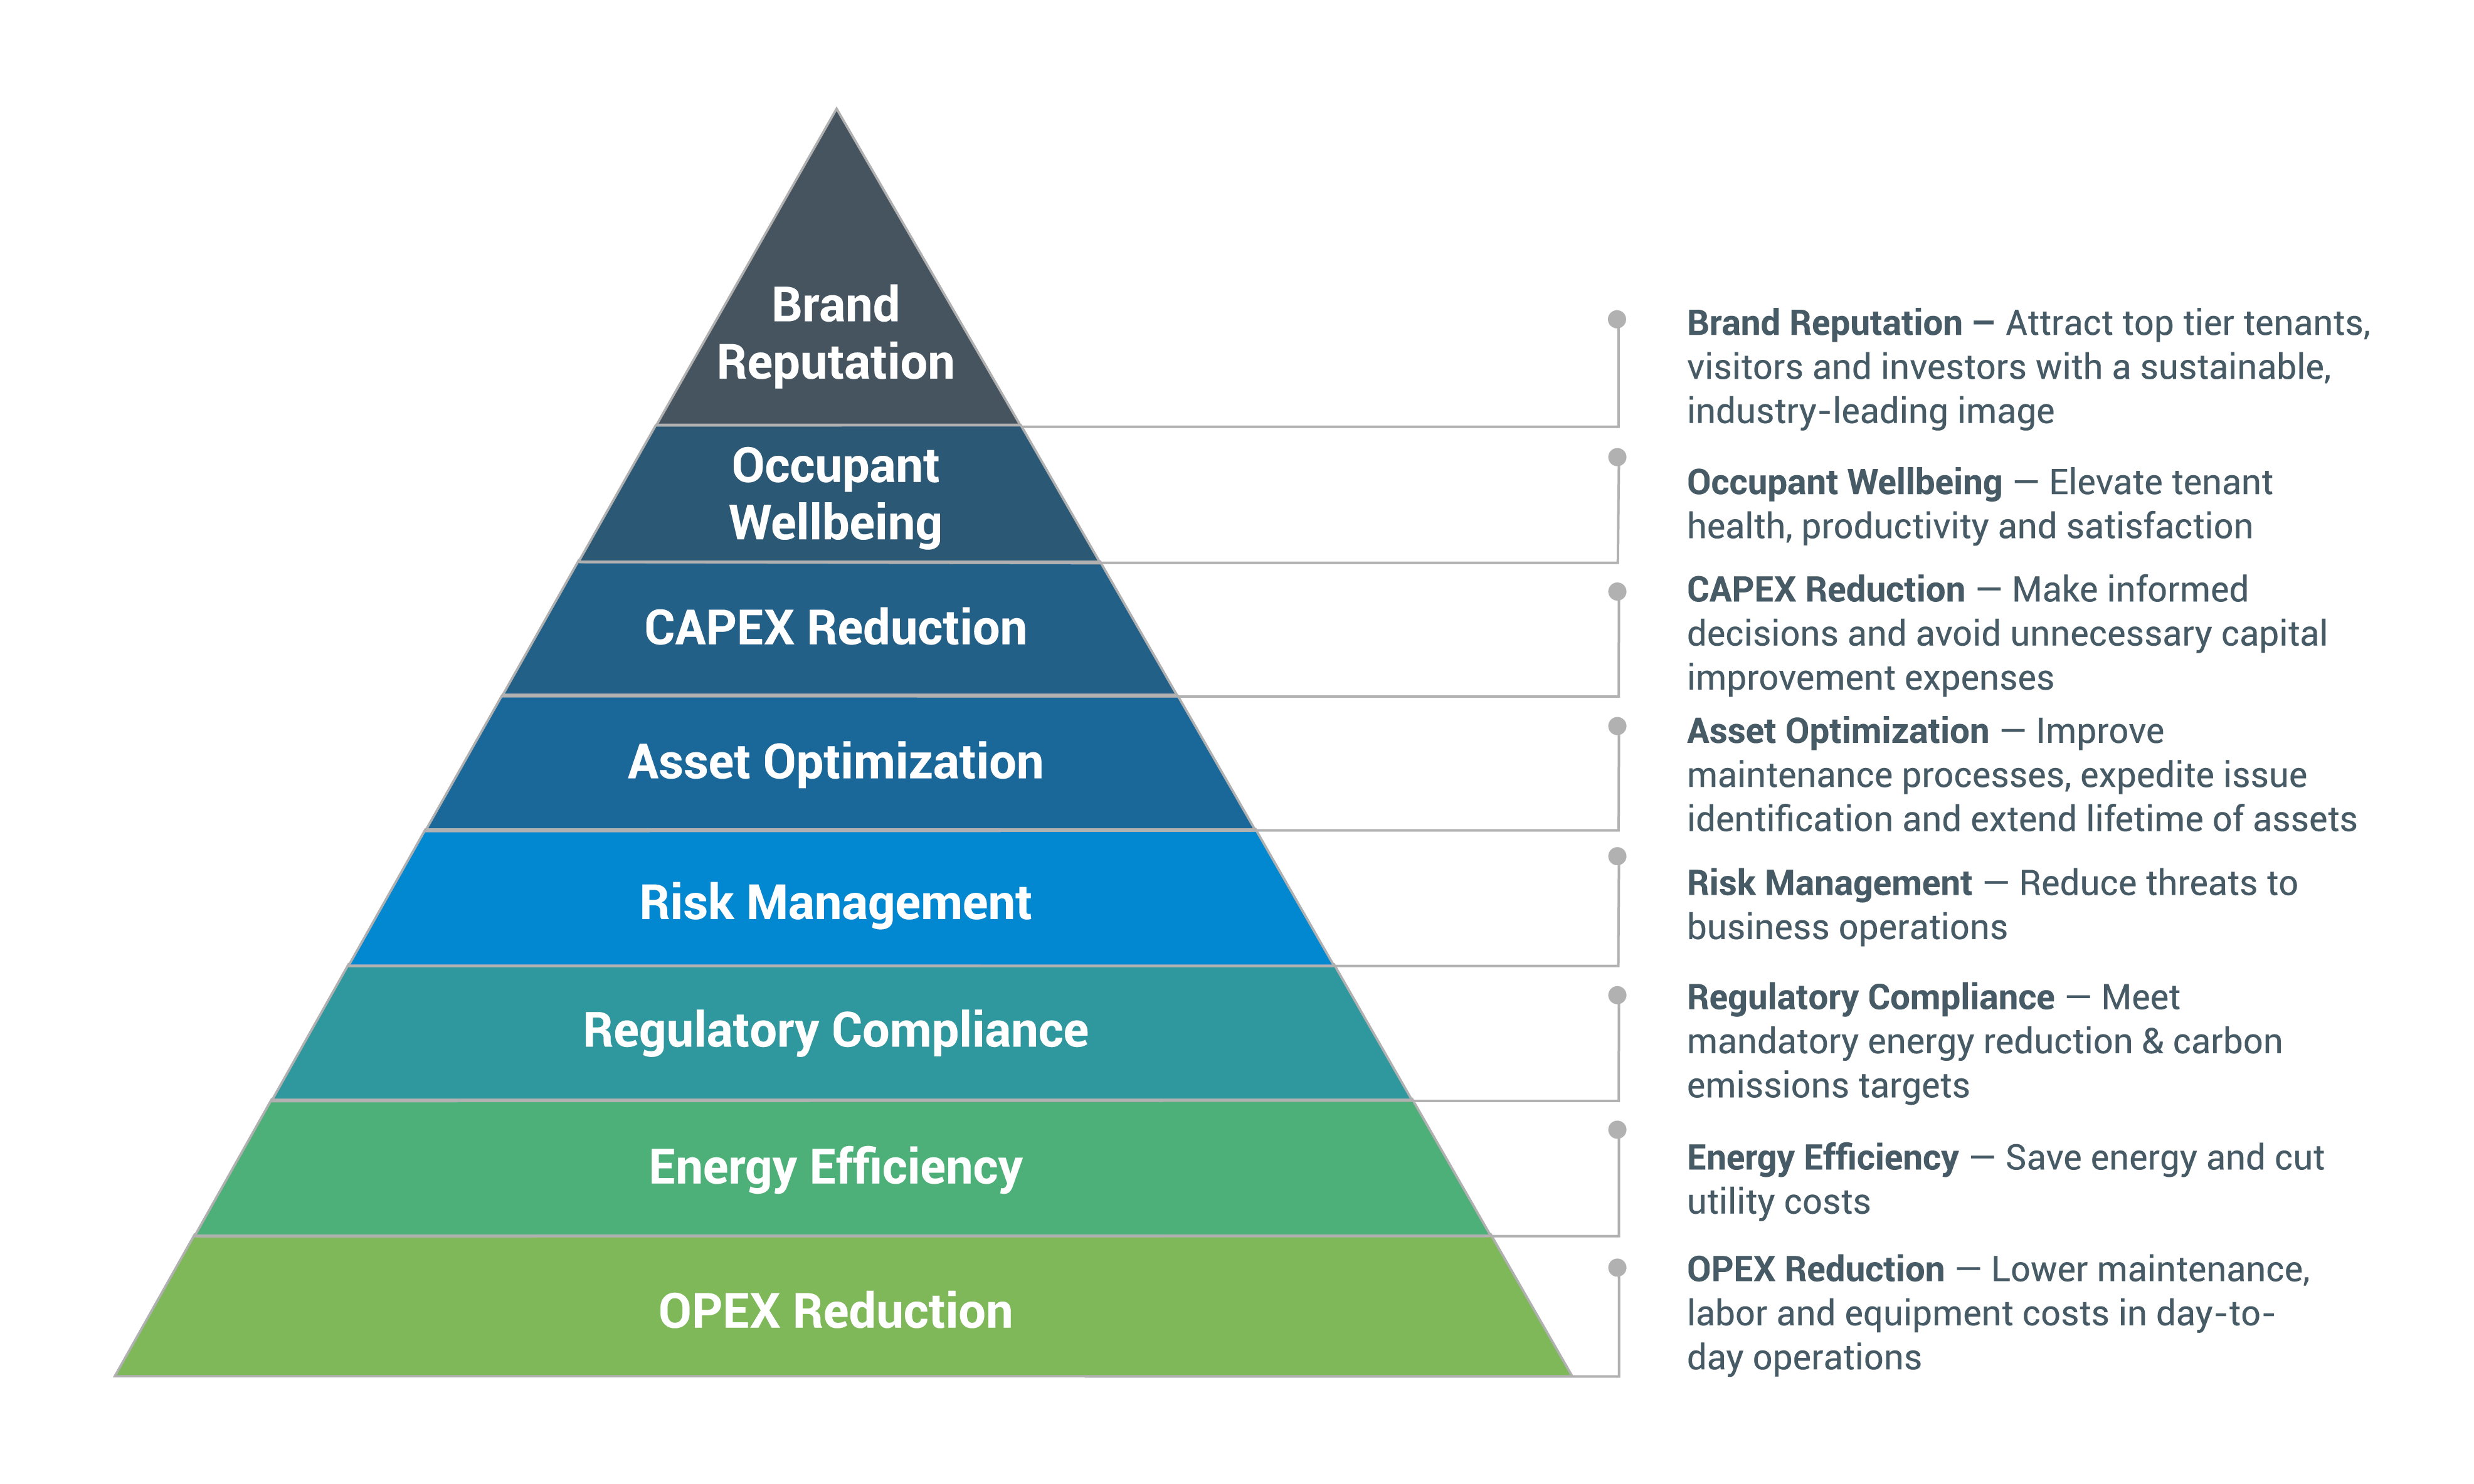 Hierarchy of building management needs